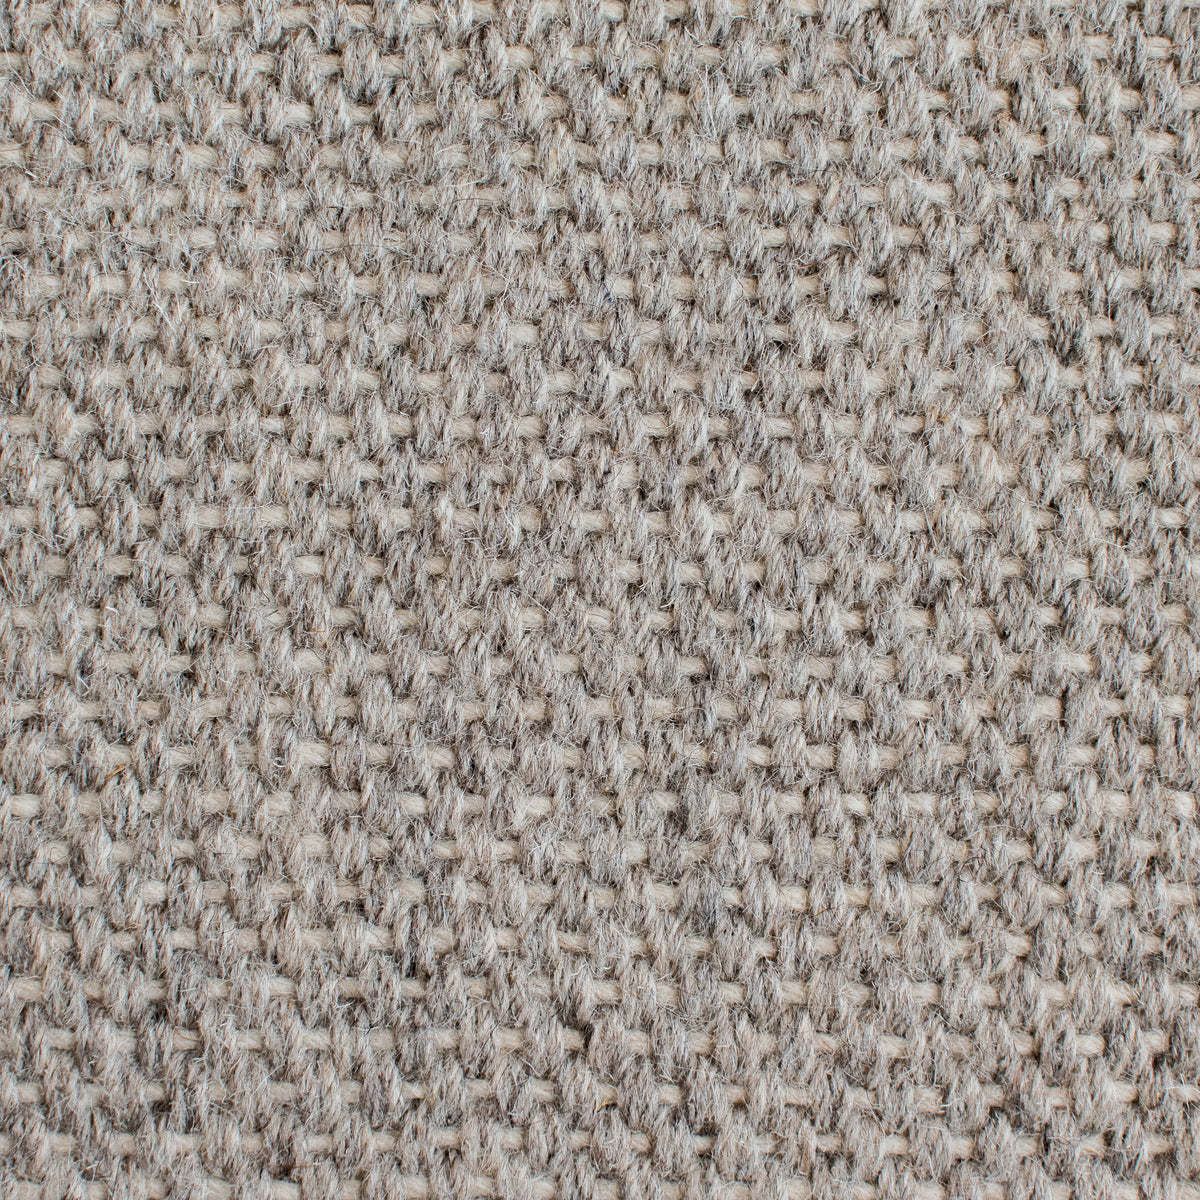 Bungalow Gray - Hand Woven Textured Wool Rug, Neutral Colors – New